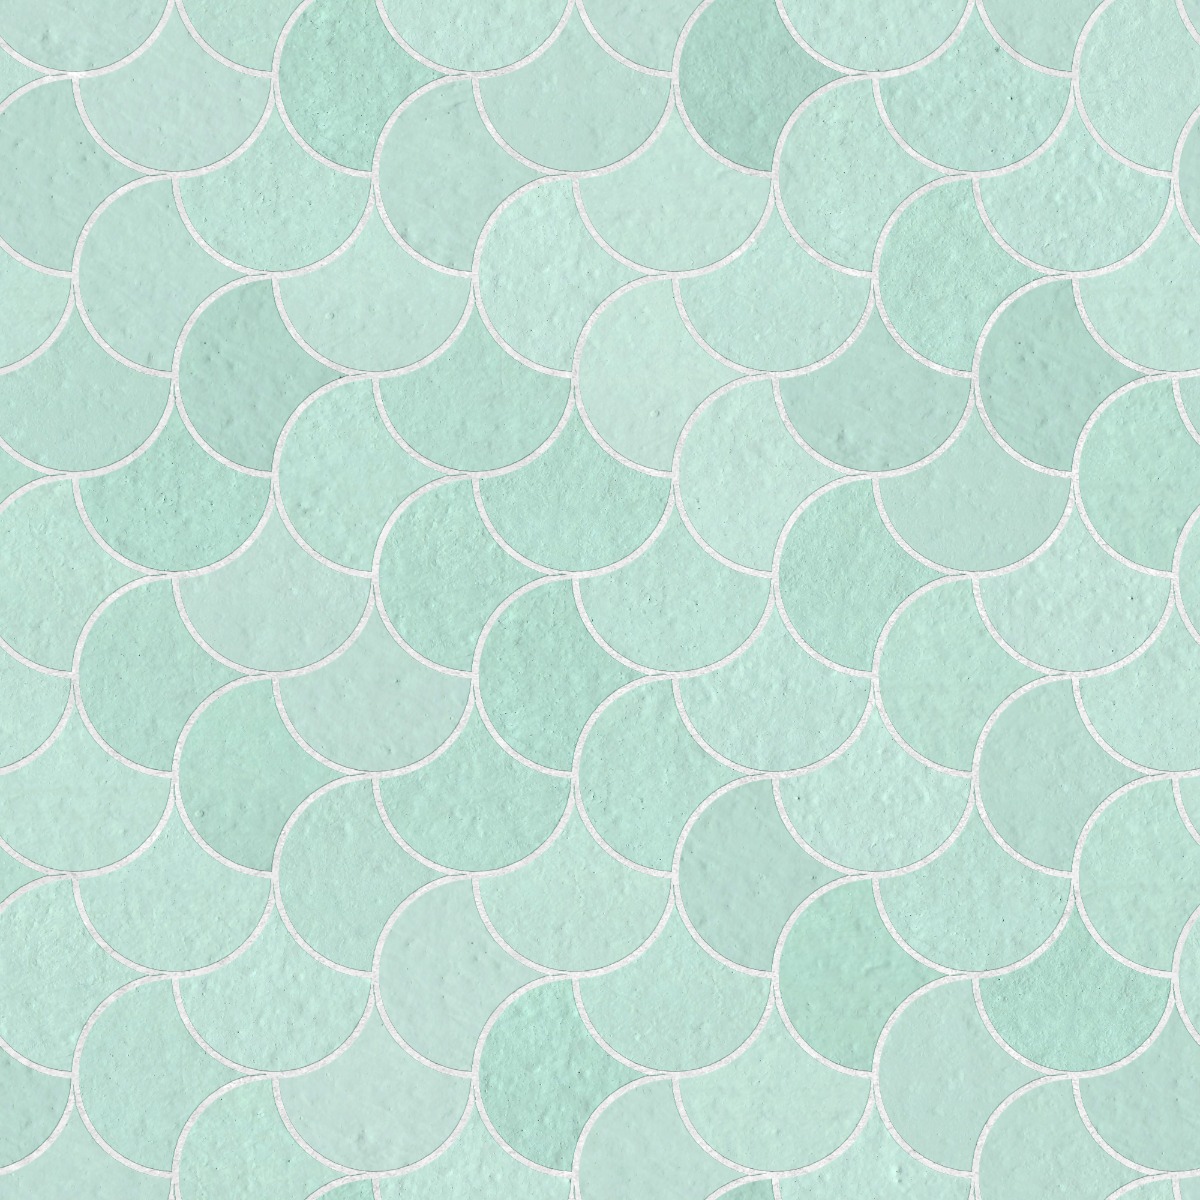 A seamless brick texture with mint green brick units arranged in a Alternating Fishscale pattern